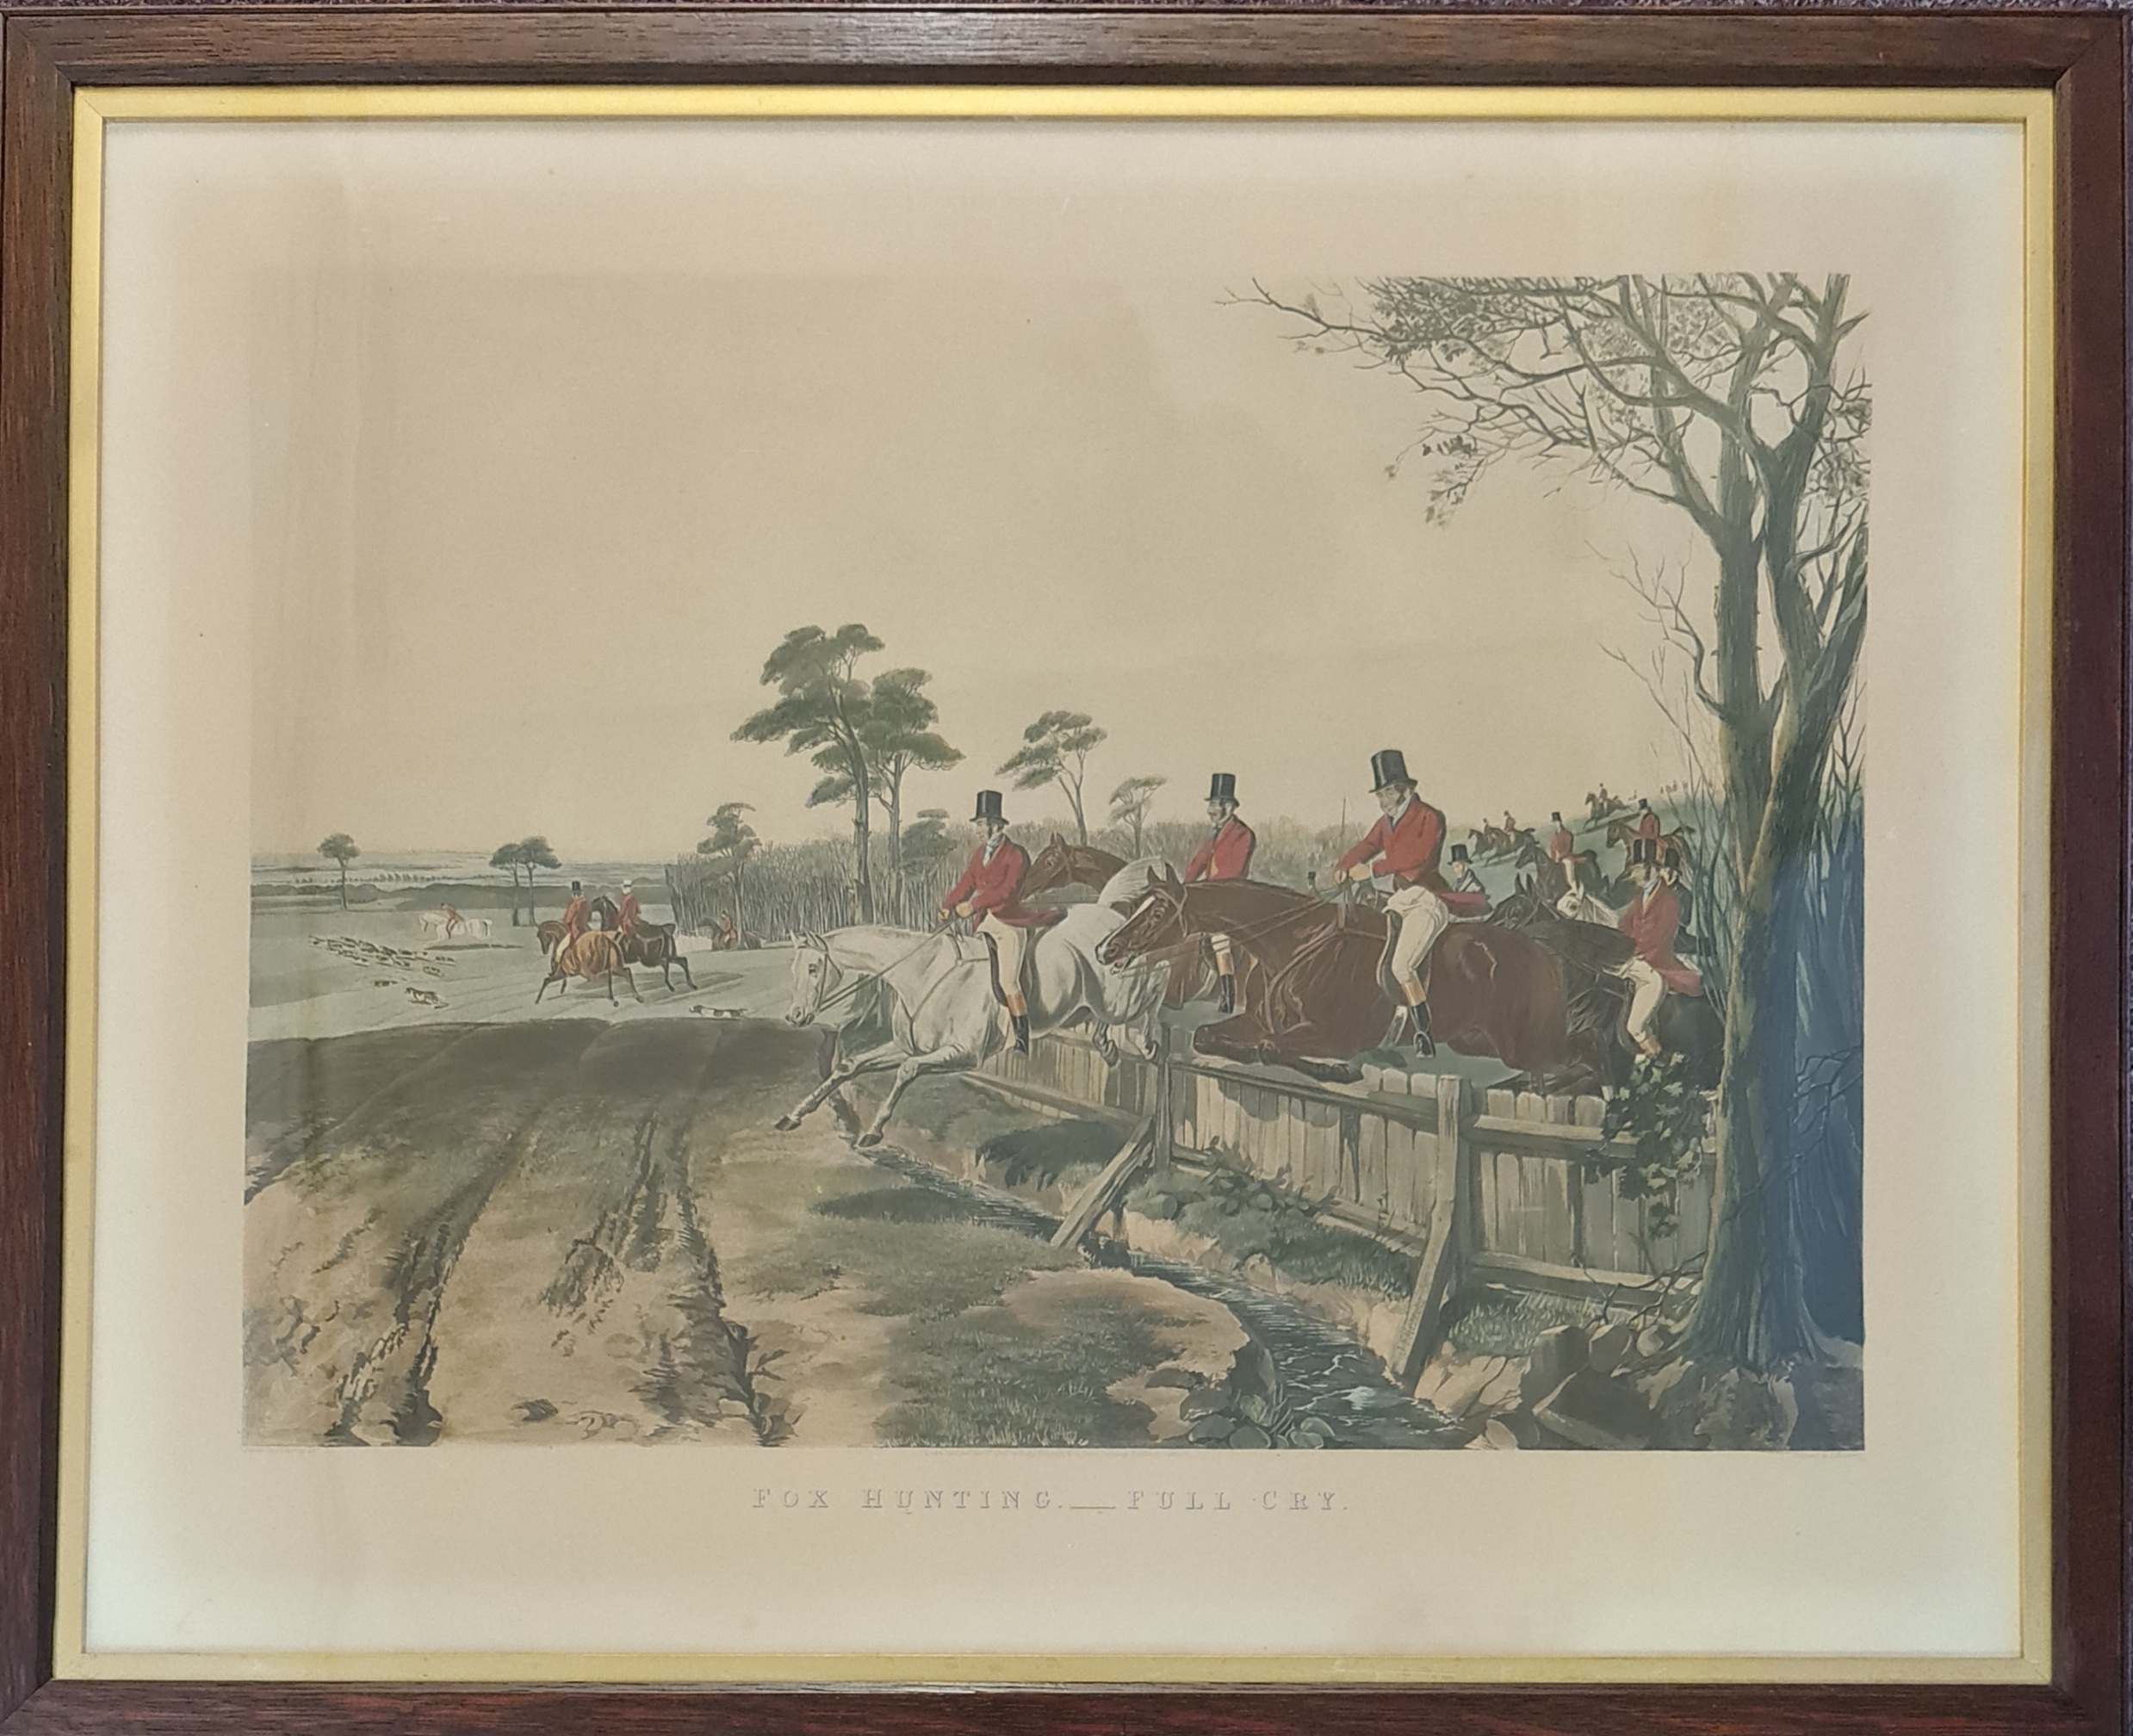 Framed fox hunting print, titled ‘Full Cry’, painted by J. F. Herring Snr, engraved by J.